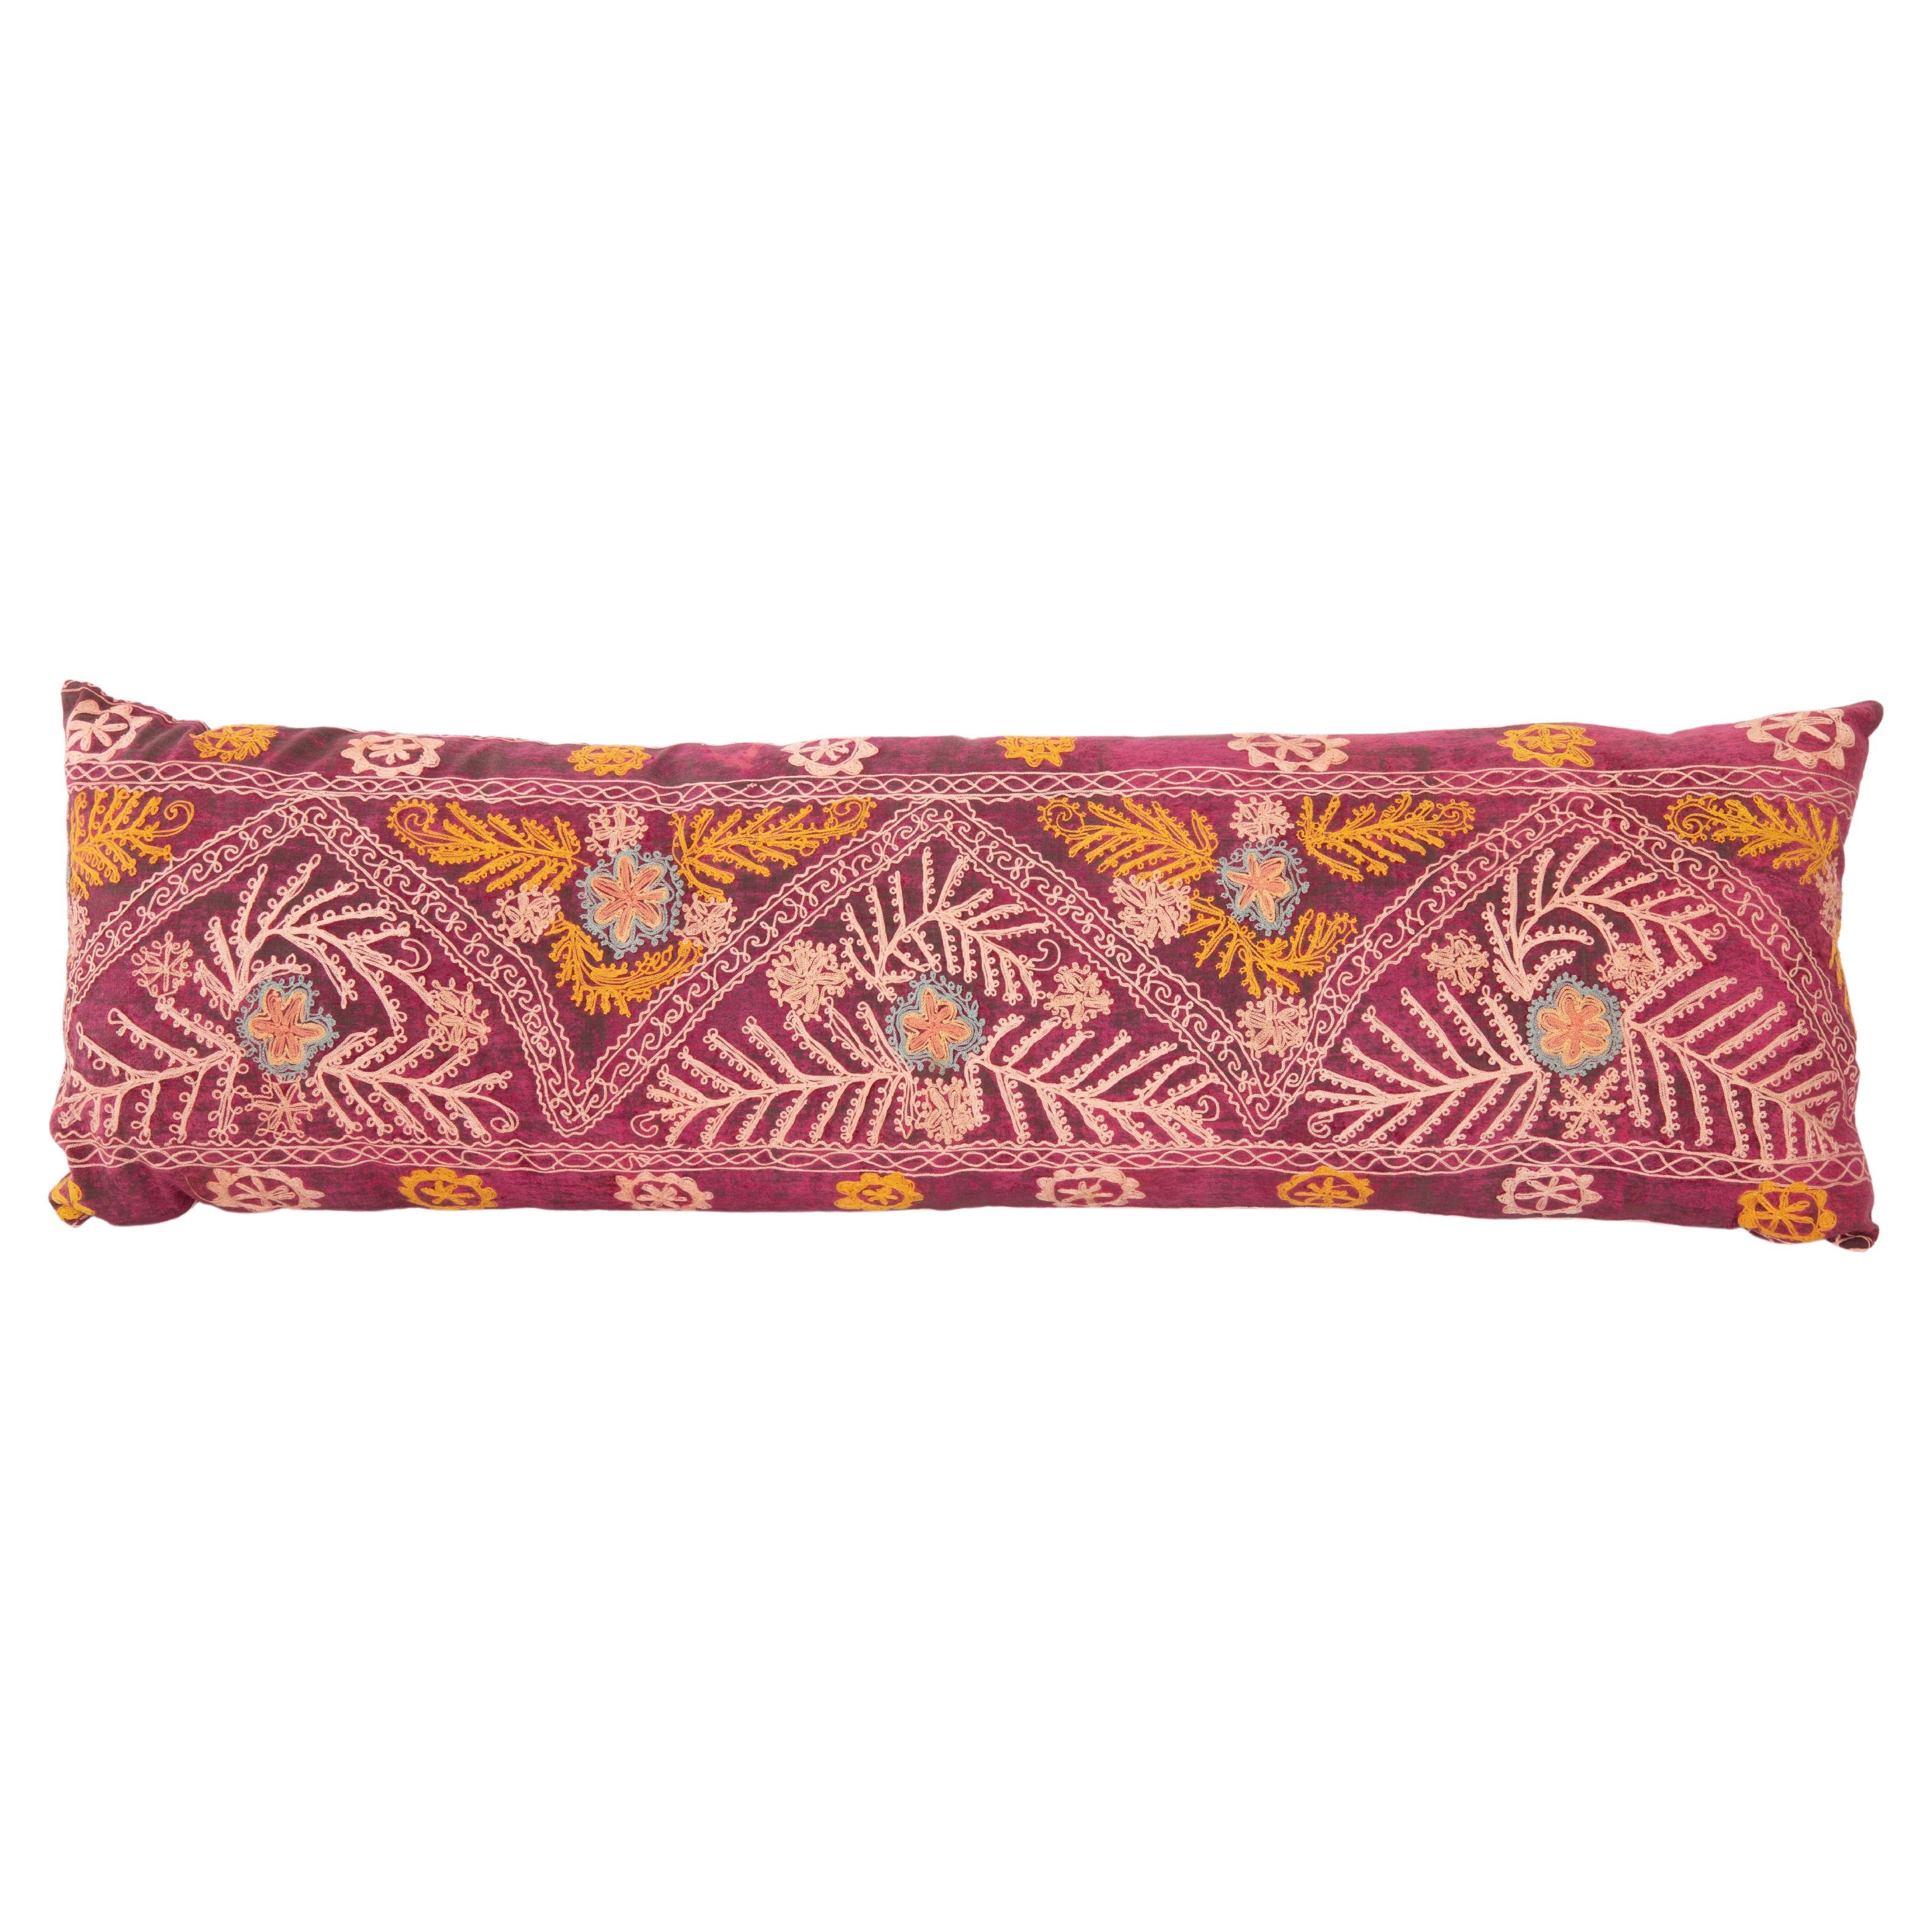 Suzani Pillow Case Made from a Vintage Velvet Ground Suzani, Mid-20th Century For Sale